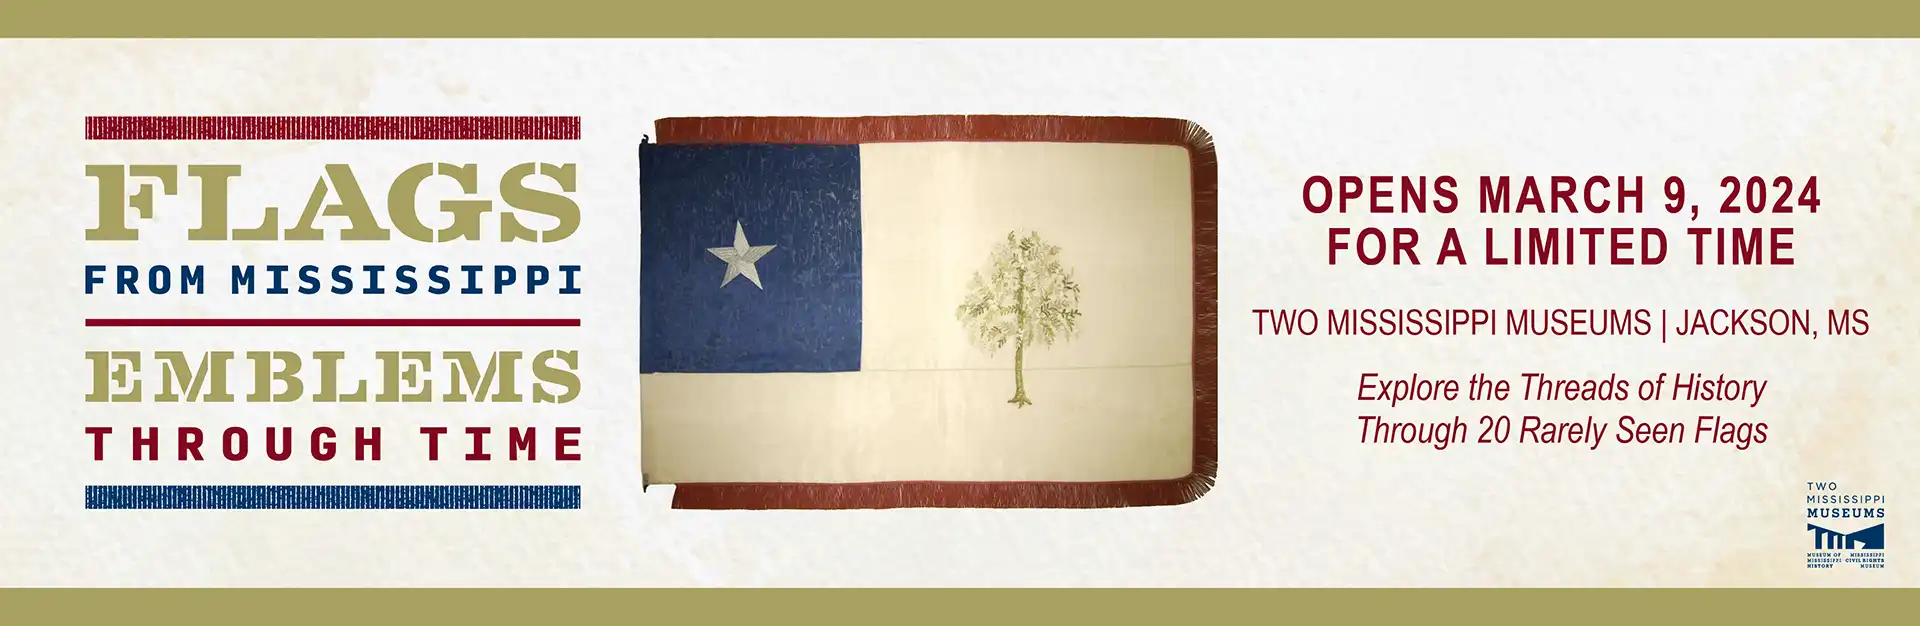 Flags from Mississippi - Emblems Through Time